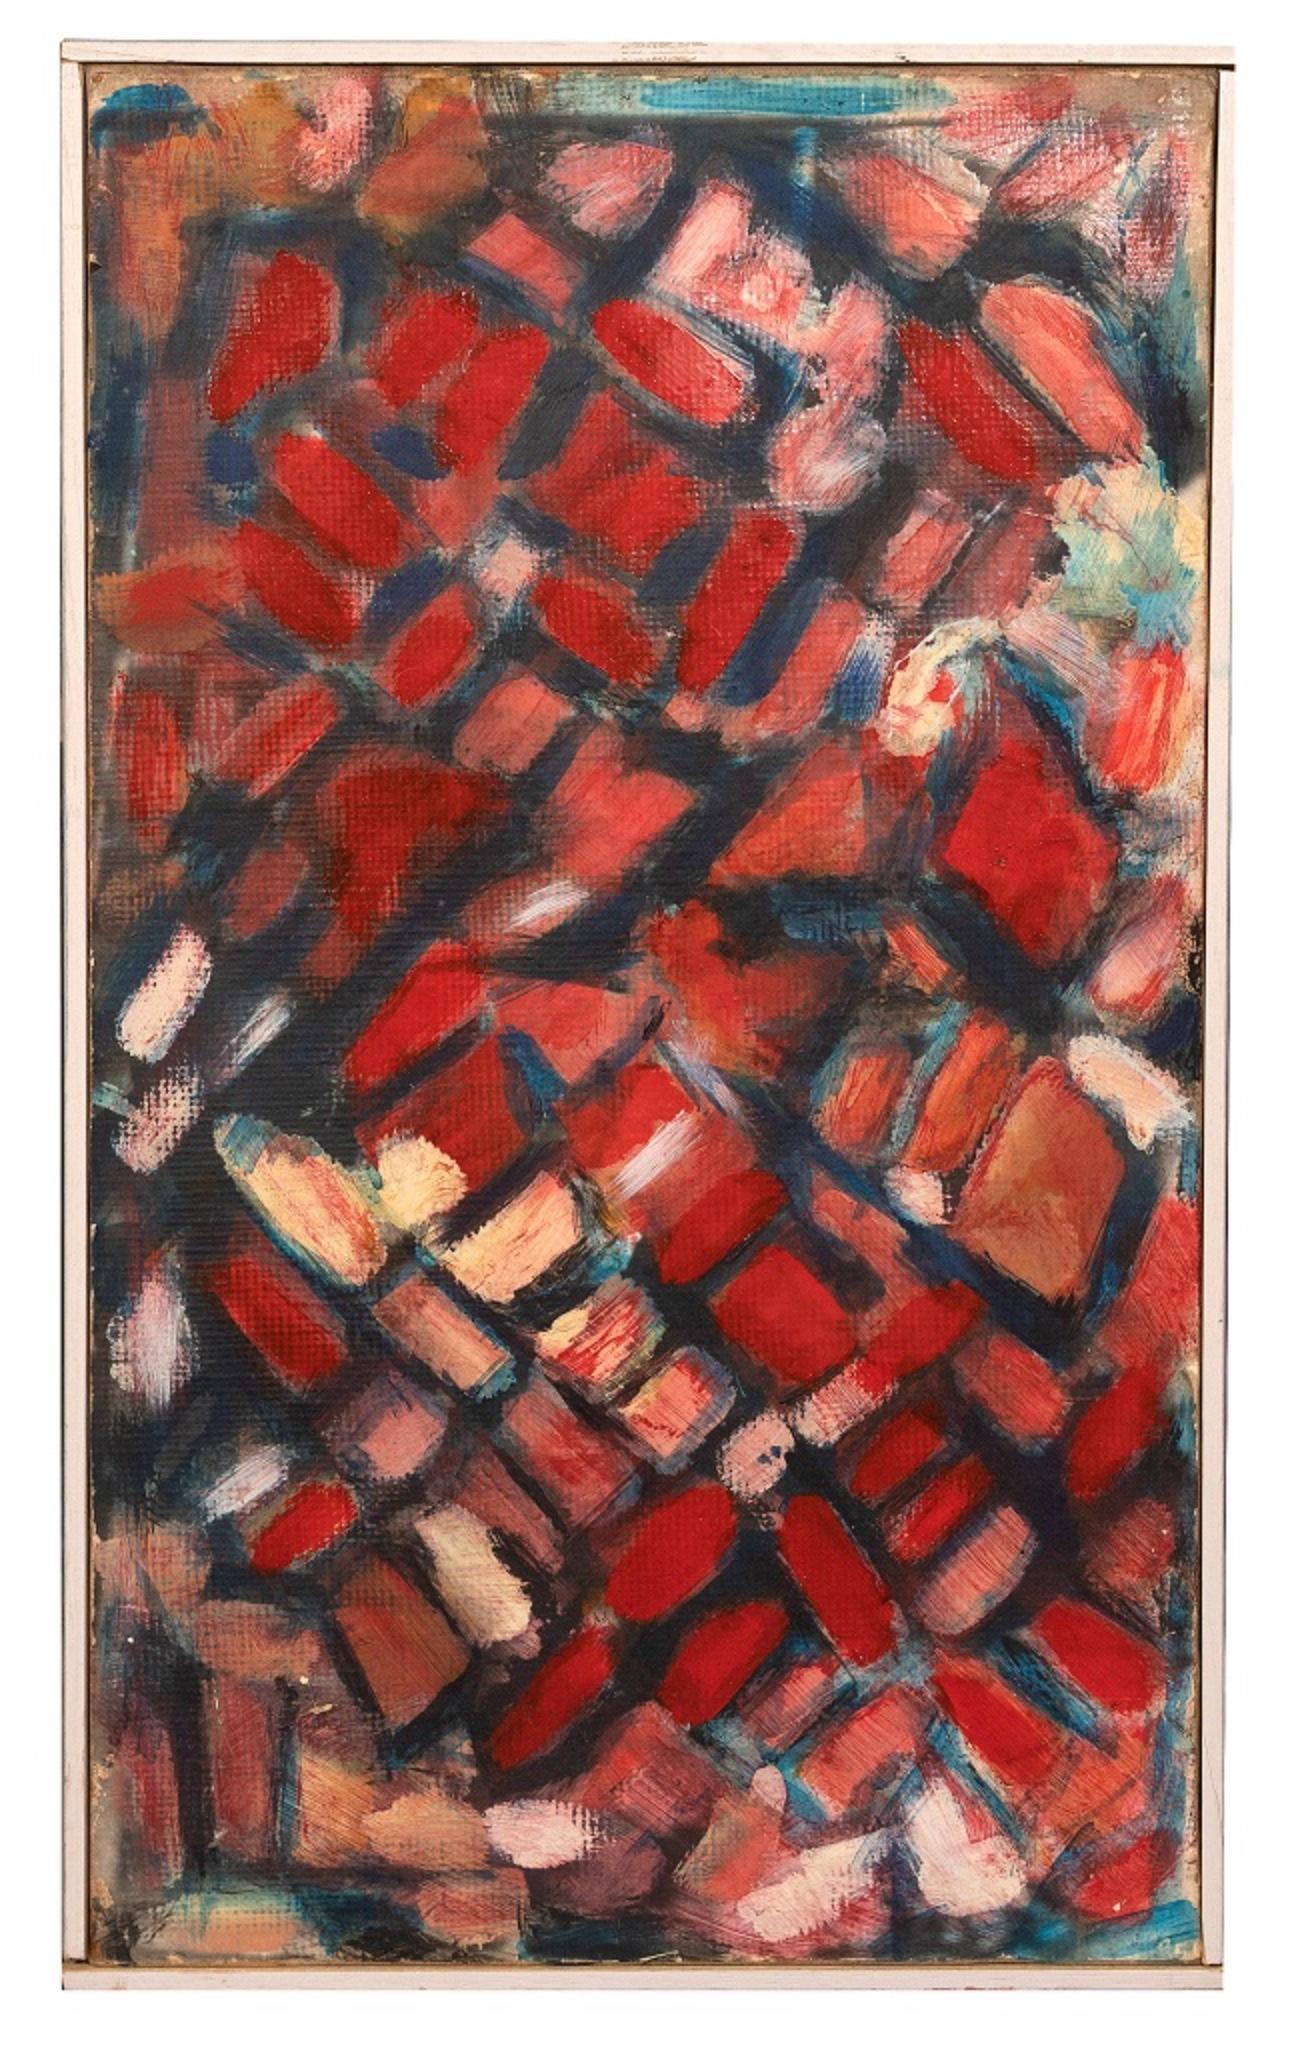 Red Reticulum is an original artwork realized by Giorgio Lo Fermo (b. 1947) in 2012.

Oil on canvas.

Hand signed and dated by the artist on the back: G.Lo Fermo 2012. 

Perfect conditions.

The composition recalls geometrical artworks realized